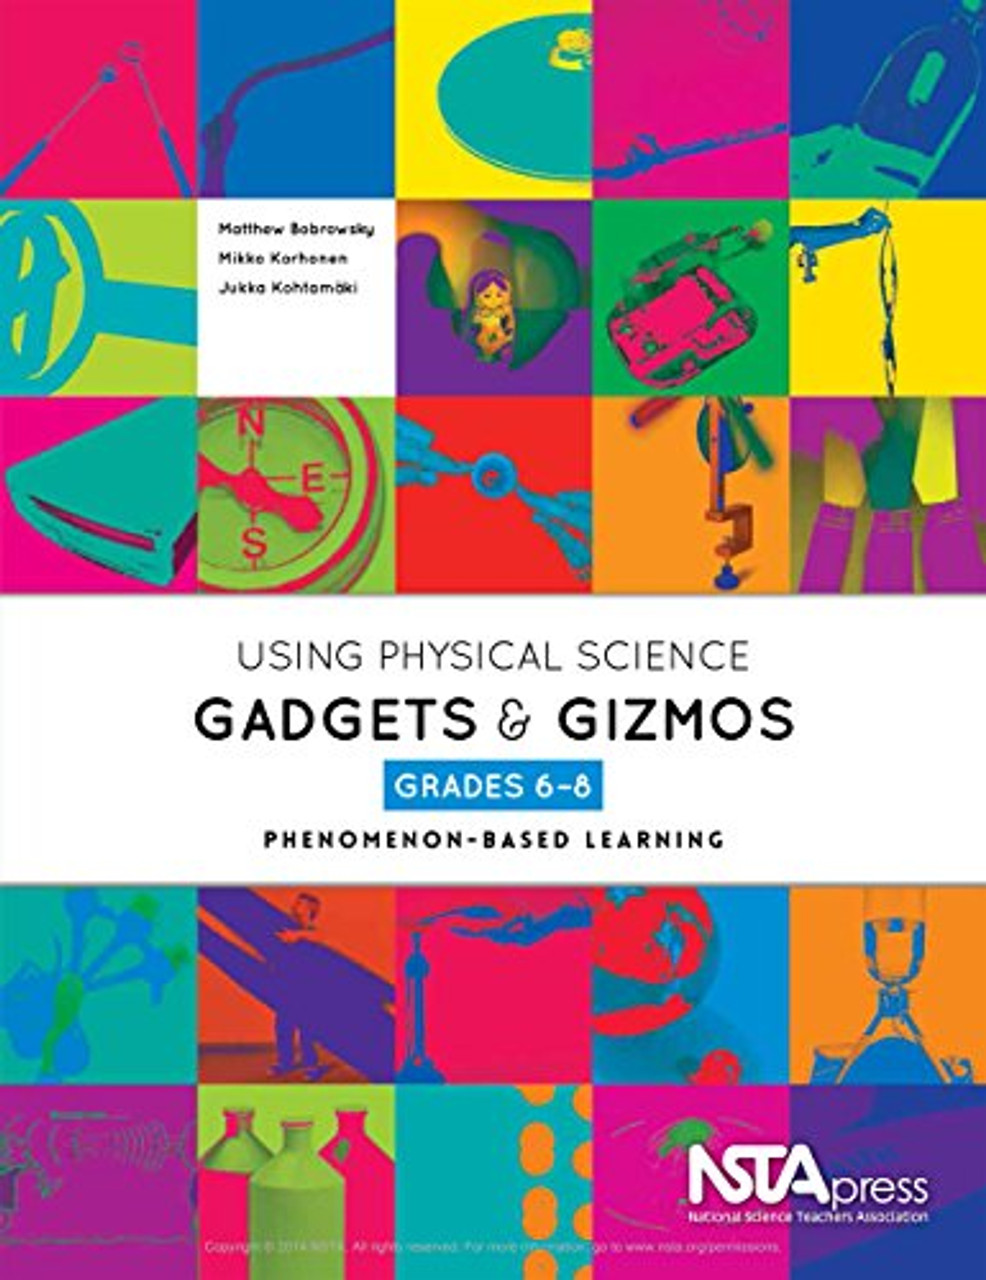 Using Physical Science Gadgets and Gizmos, Grades 6-8: Phenomenon-Based Learning by Matthew Bobrowsky